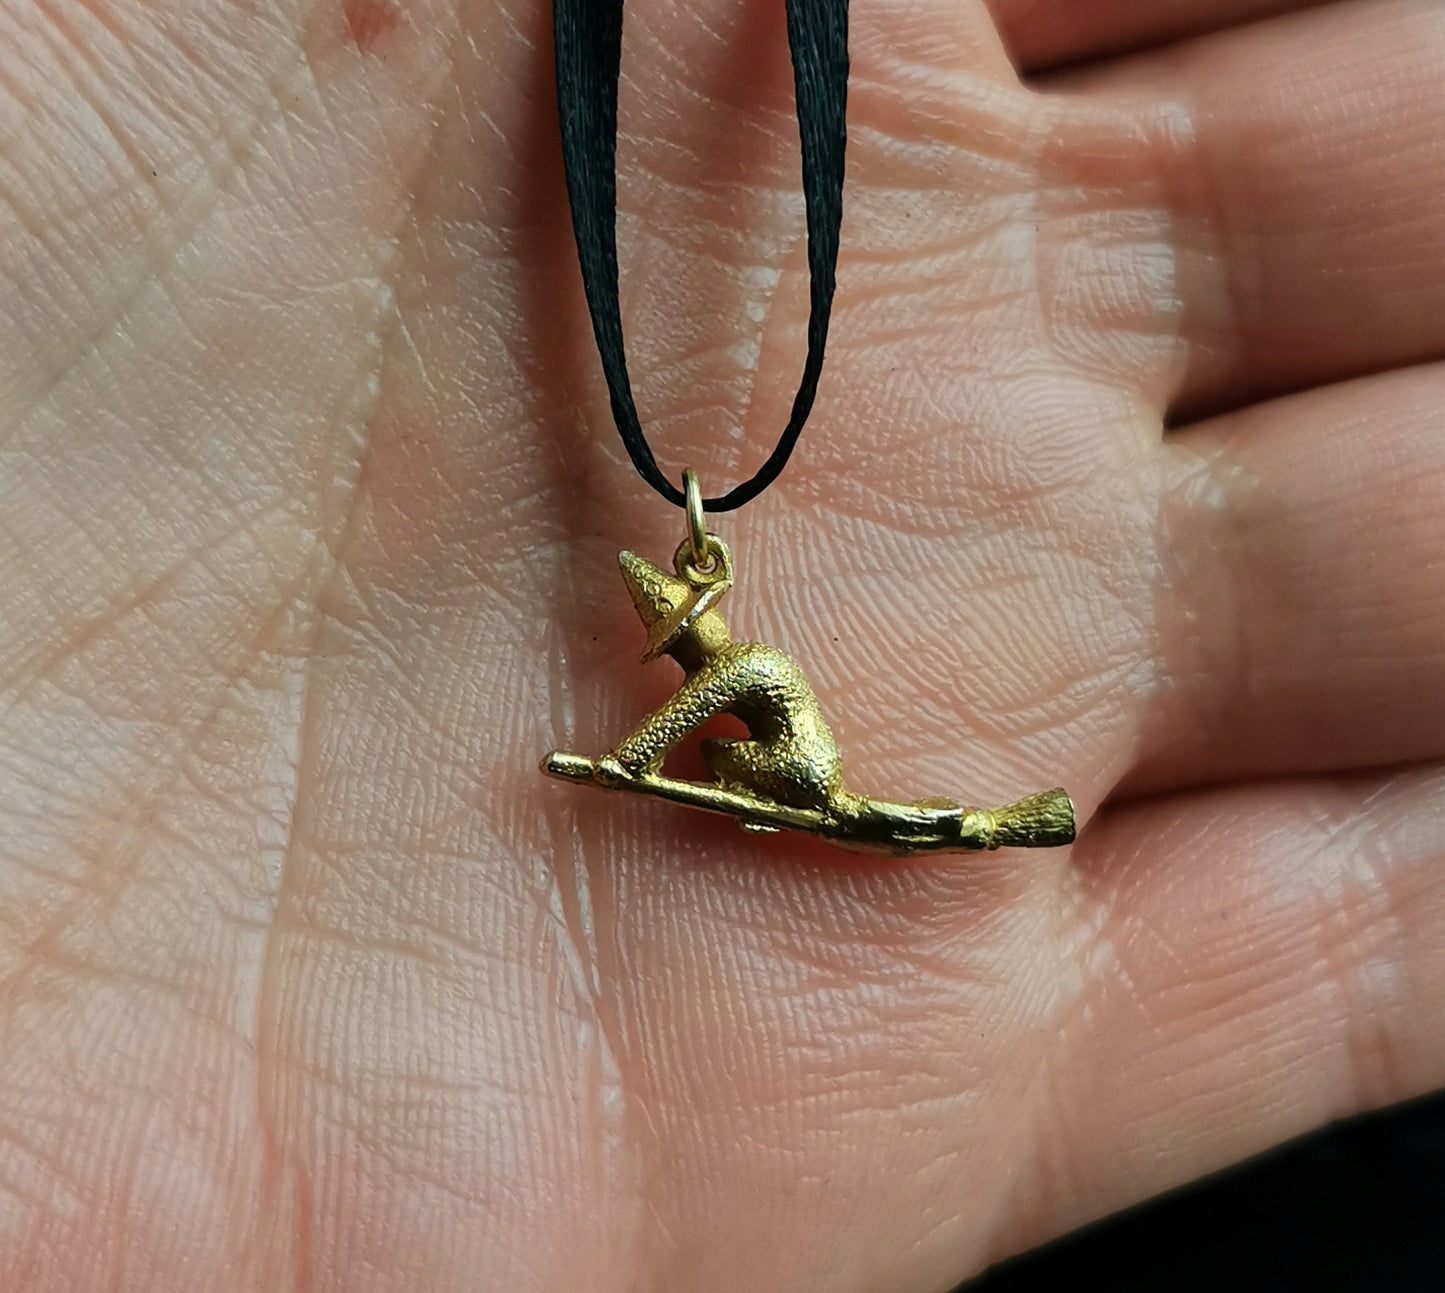 Vintage 9ct gold witch and Broomstick pendant, charm